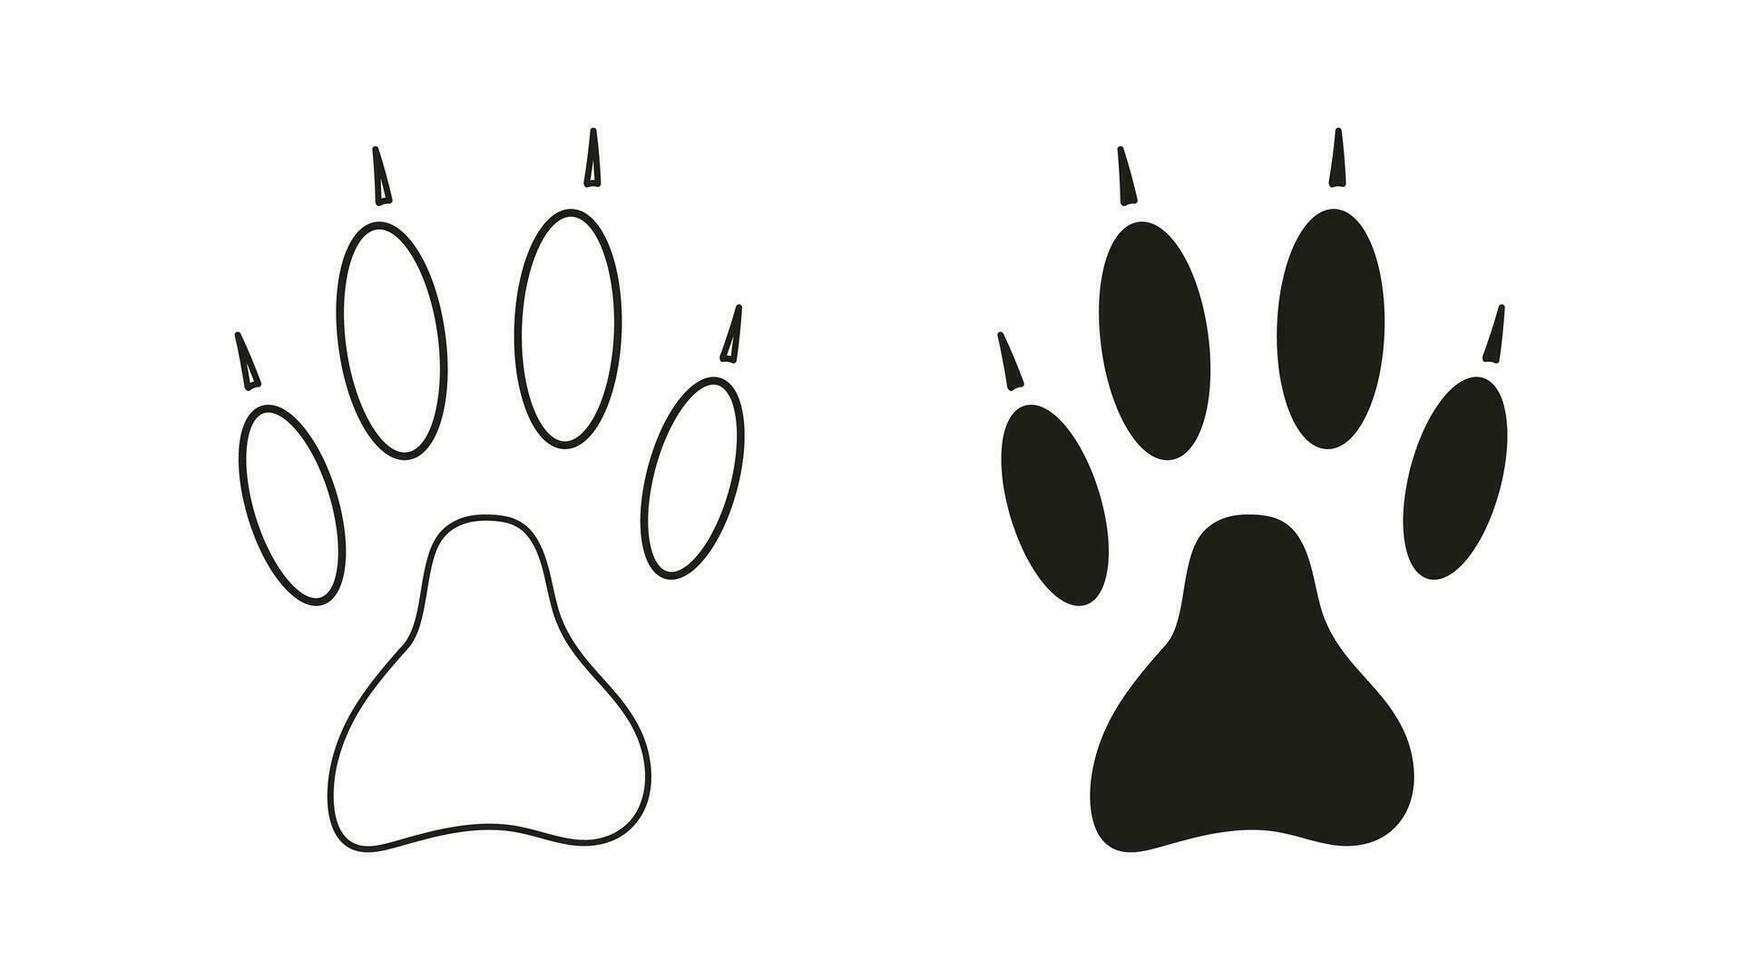 Dog, wolf, coyote or fox paw footprint with claws. Silhouette, contour. Icon. Black vector isolated on white. Paw print of a wild animal, jackal, bulldog, shepherd, bull terrier, retriever, rottweiler